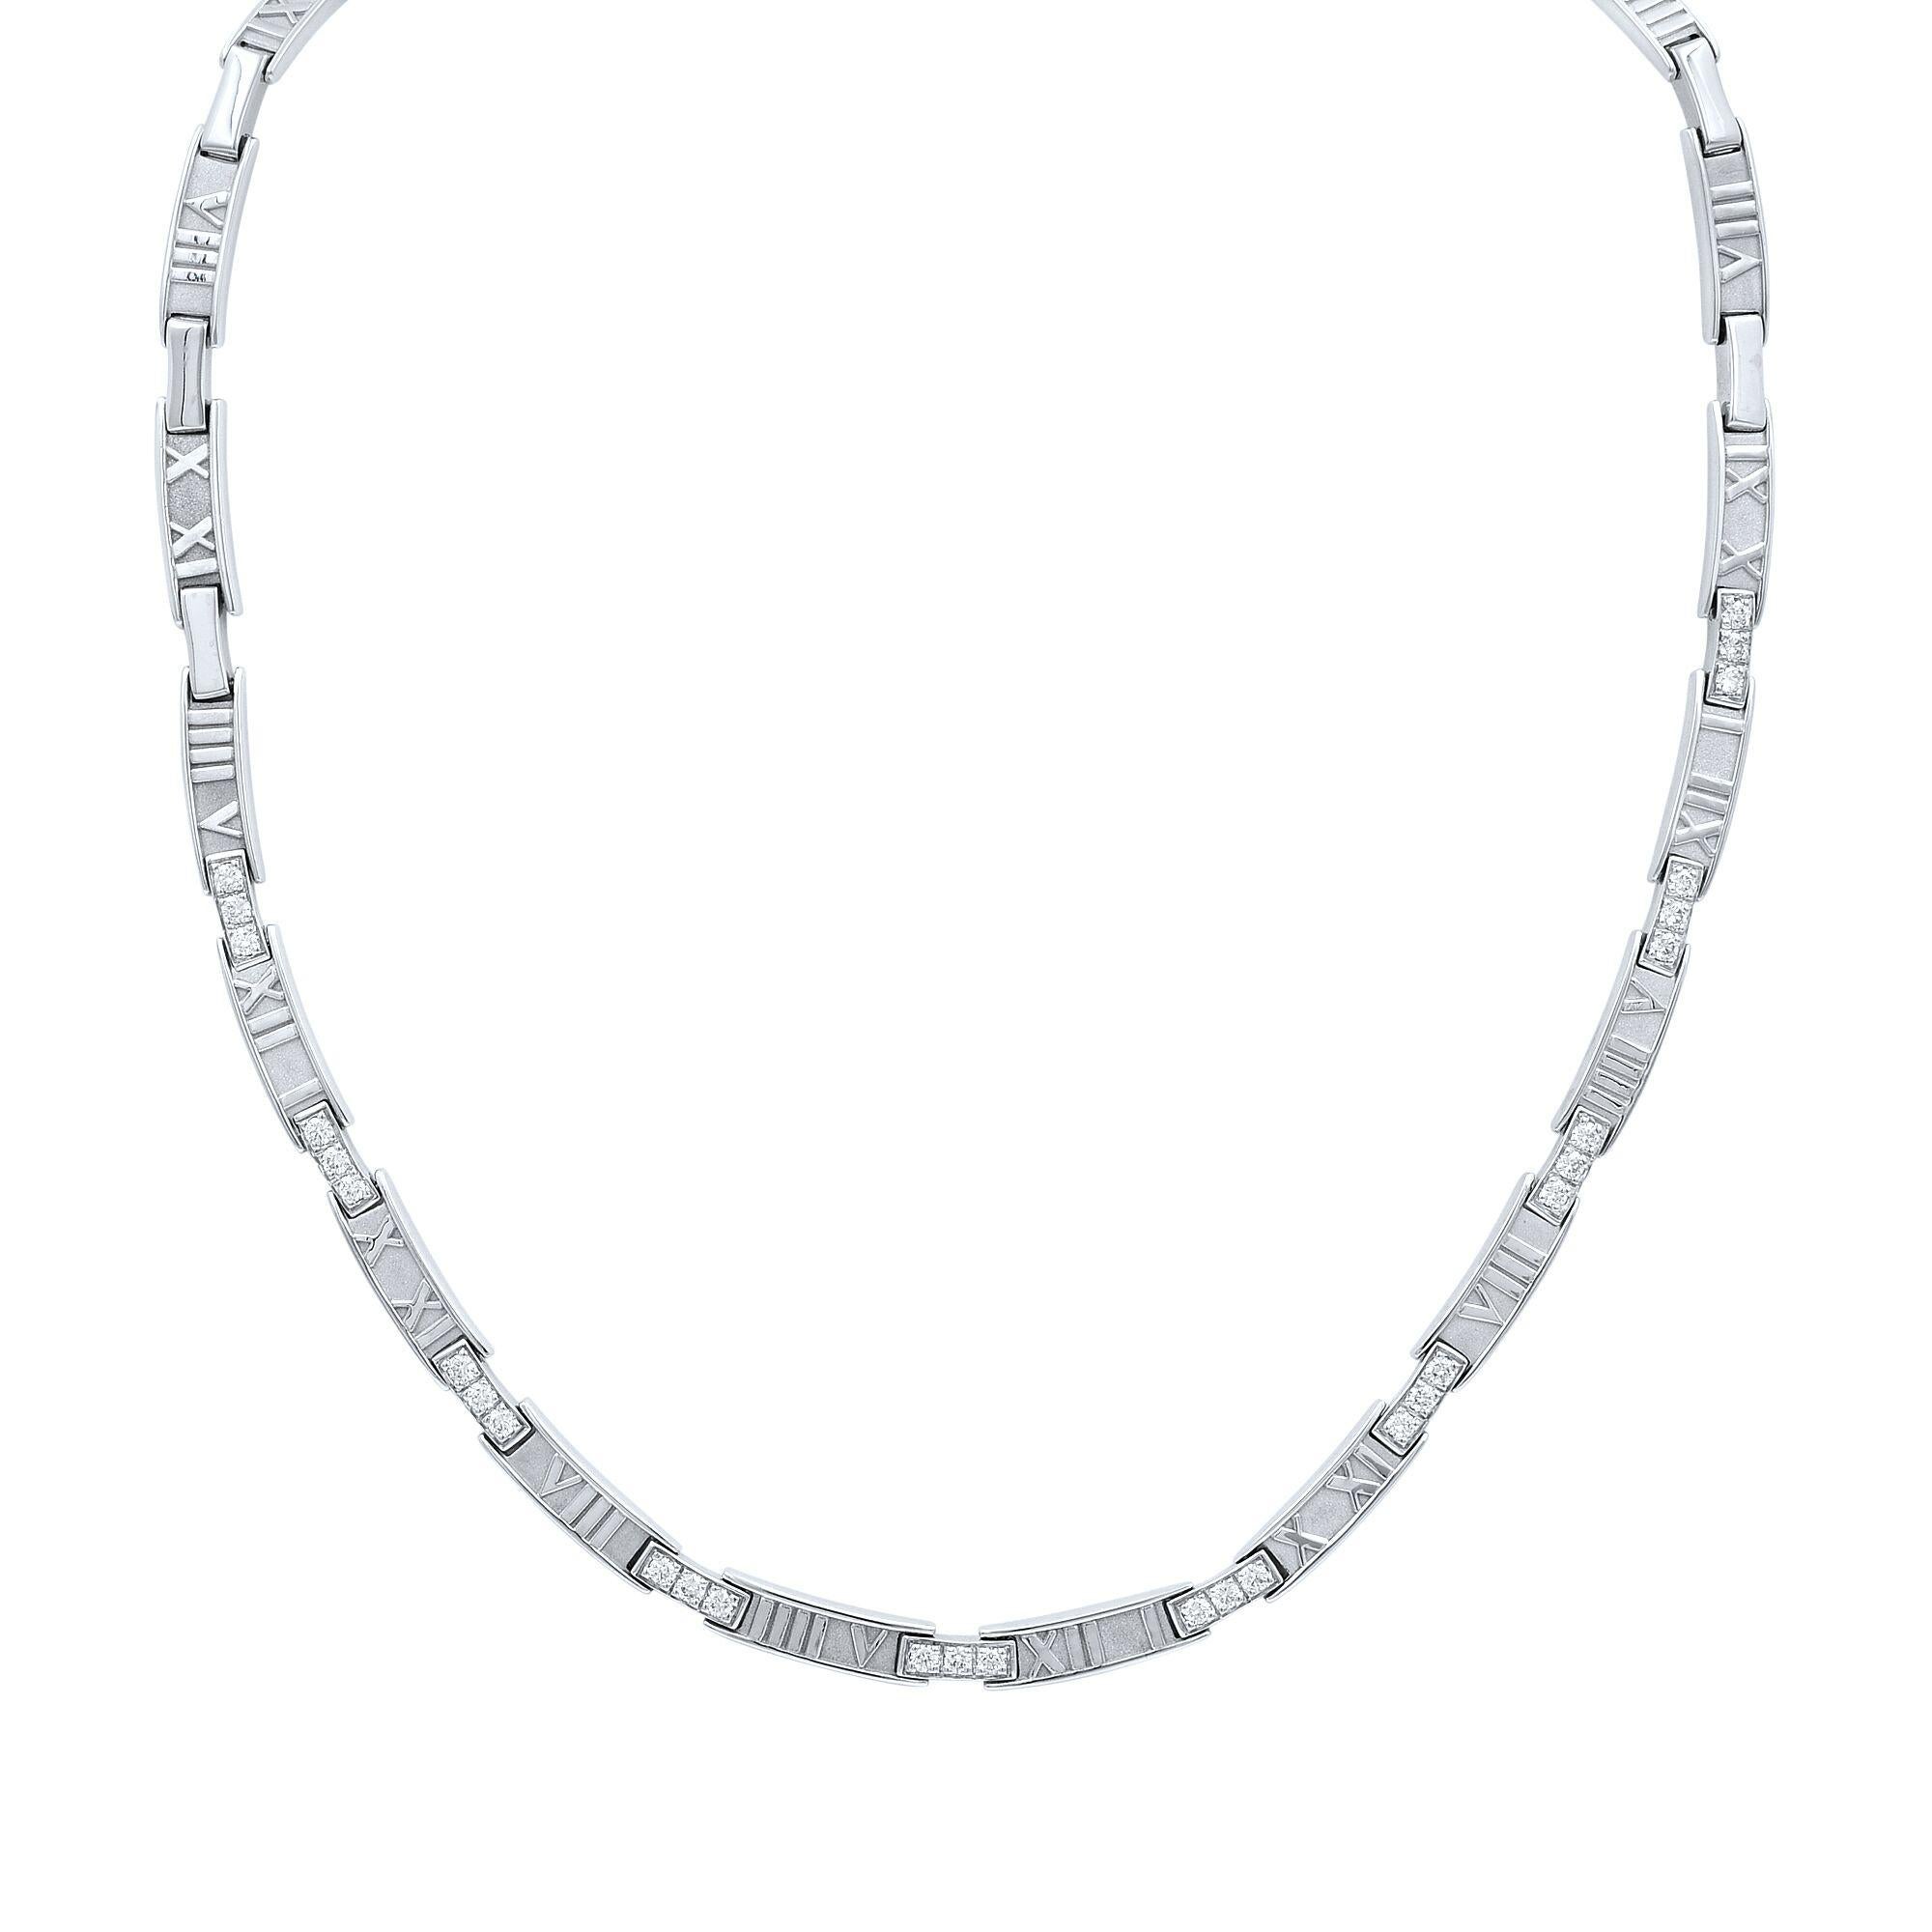 18k white gold and diamond Tiffany & Co jewelry set of necklace, bracelet and earrings from the Atlas collection. Total carat weigh of round cut diamonds 3.70cts. Necklace length: 18 inches. Bracelet length: 7.5 inch, 5mm width. Earrings are 16mm